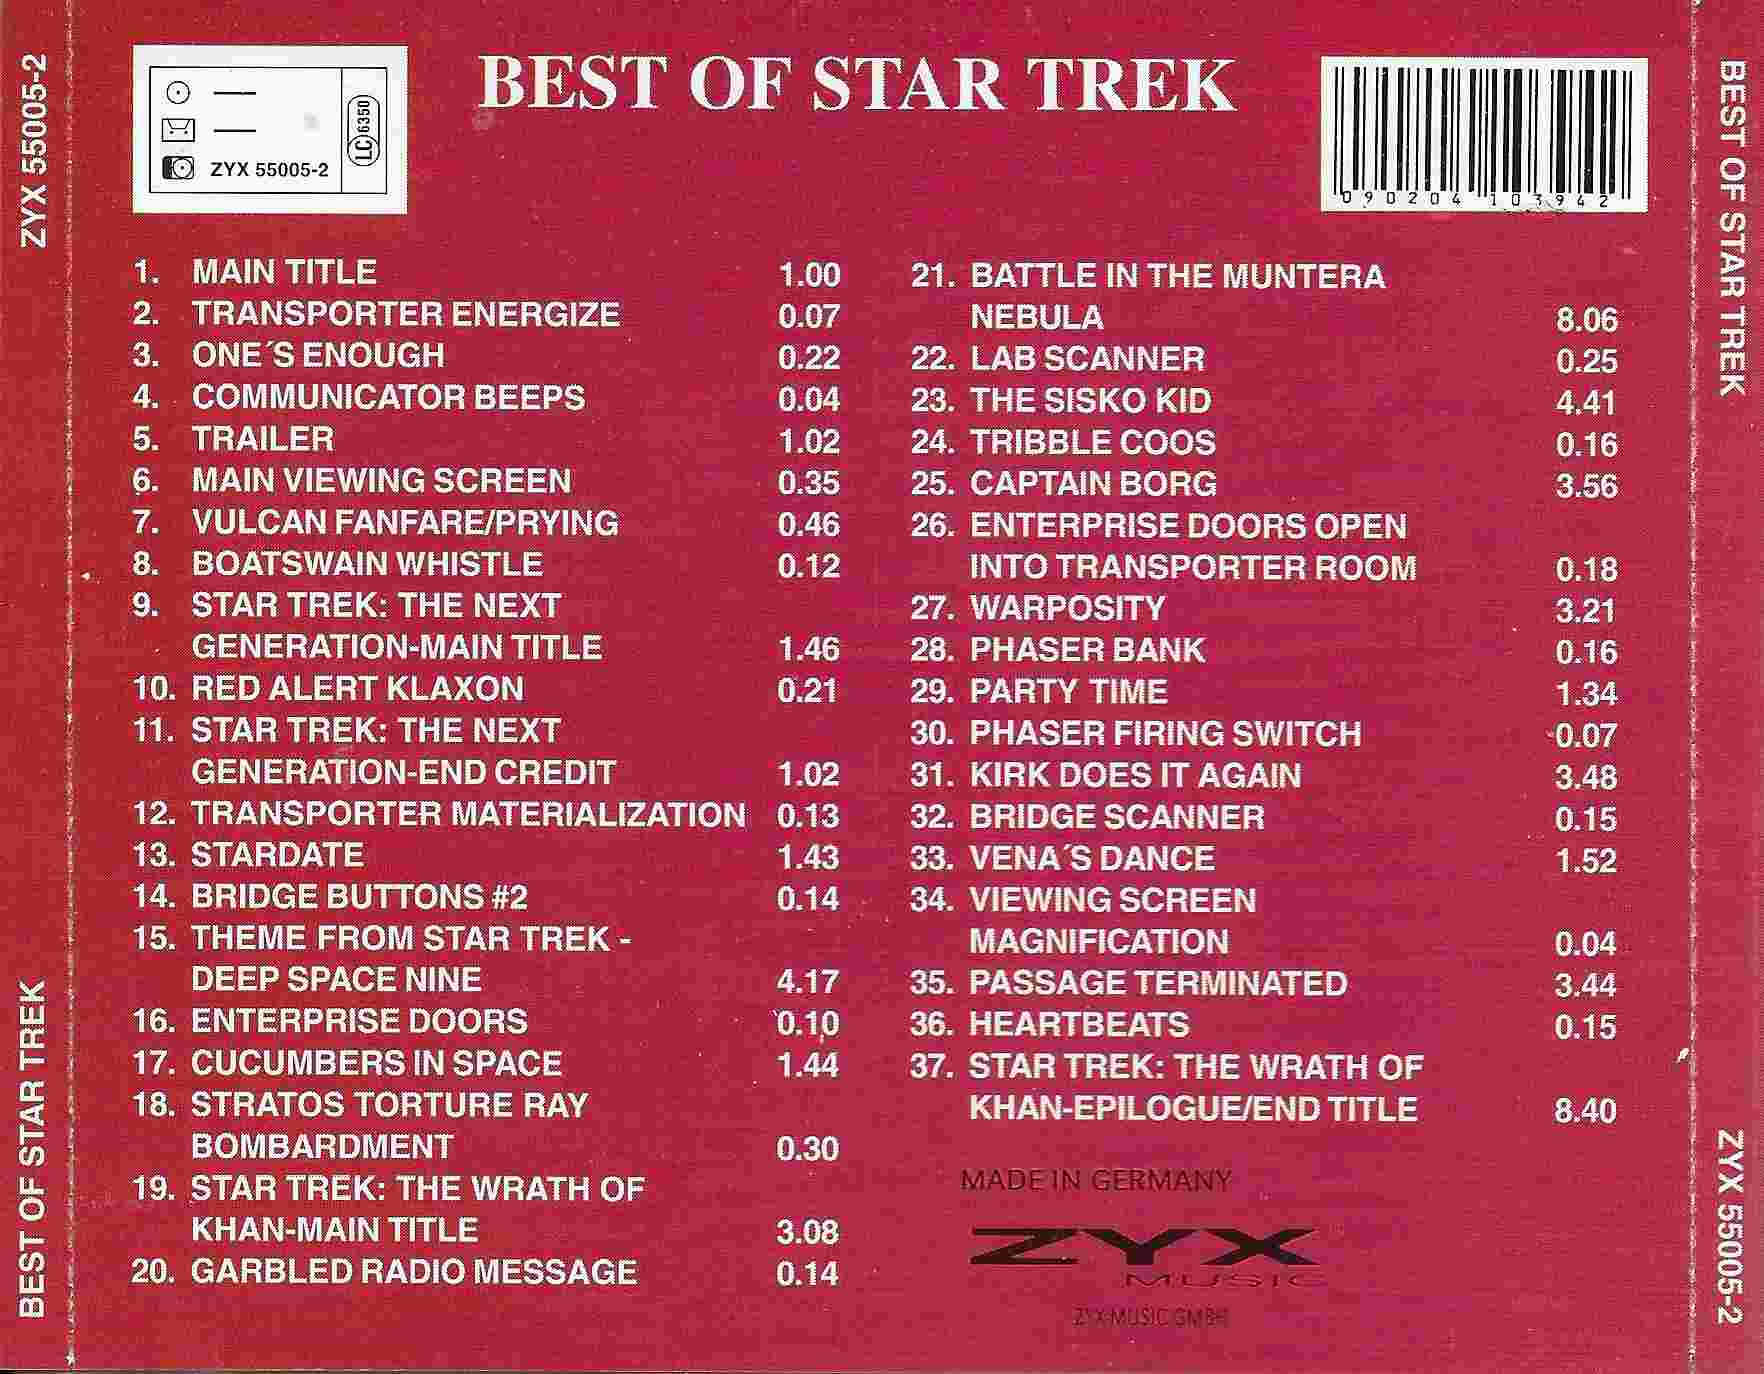 Picture of 2YX 550052 The best of star trek by artist Alexander Courage / Various from the BBC records and Tapes library